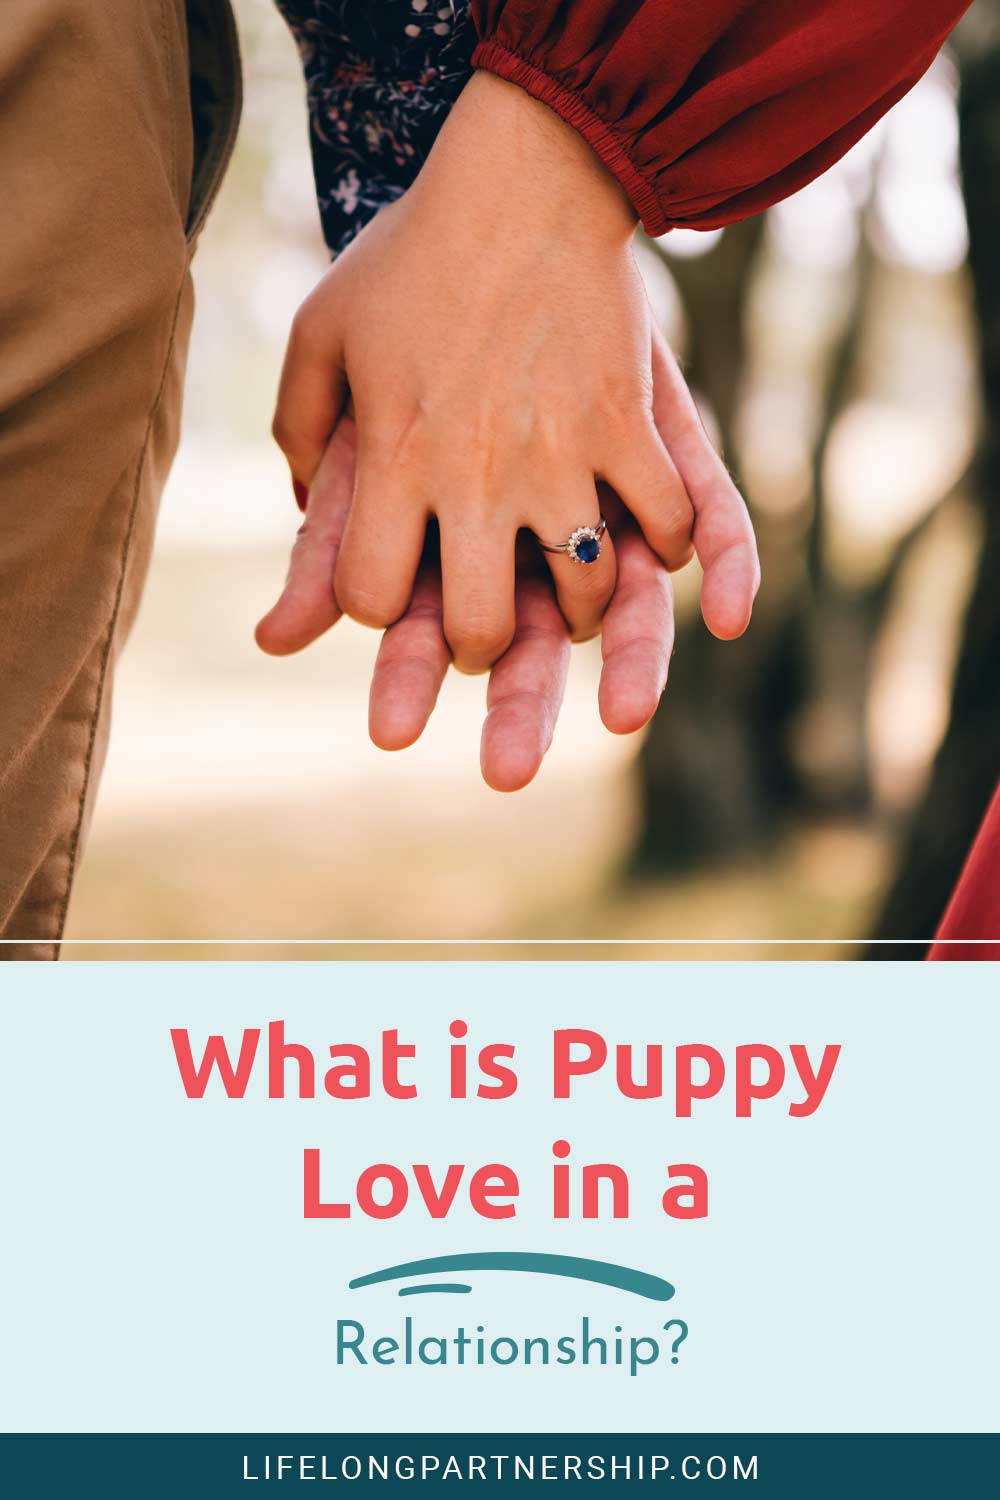 What is Puppy Love in a Relationship?